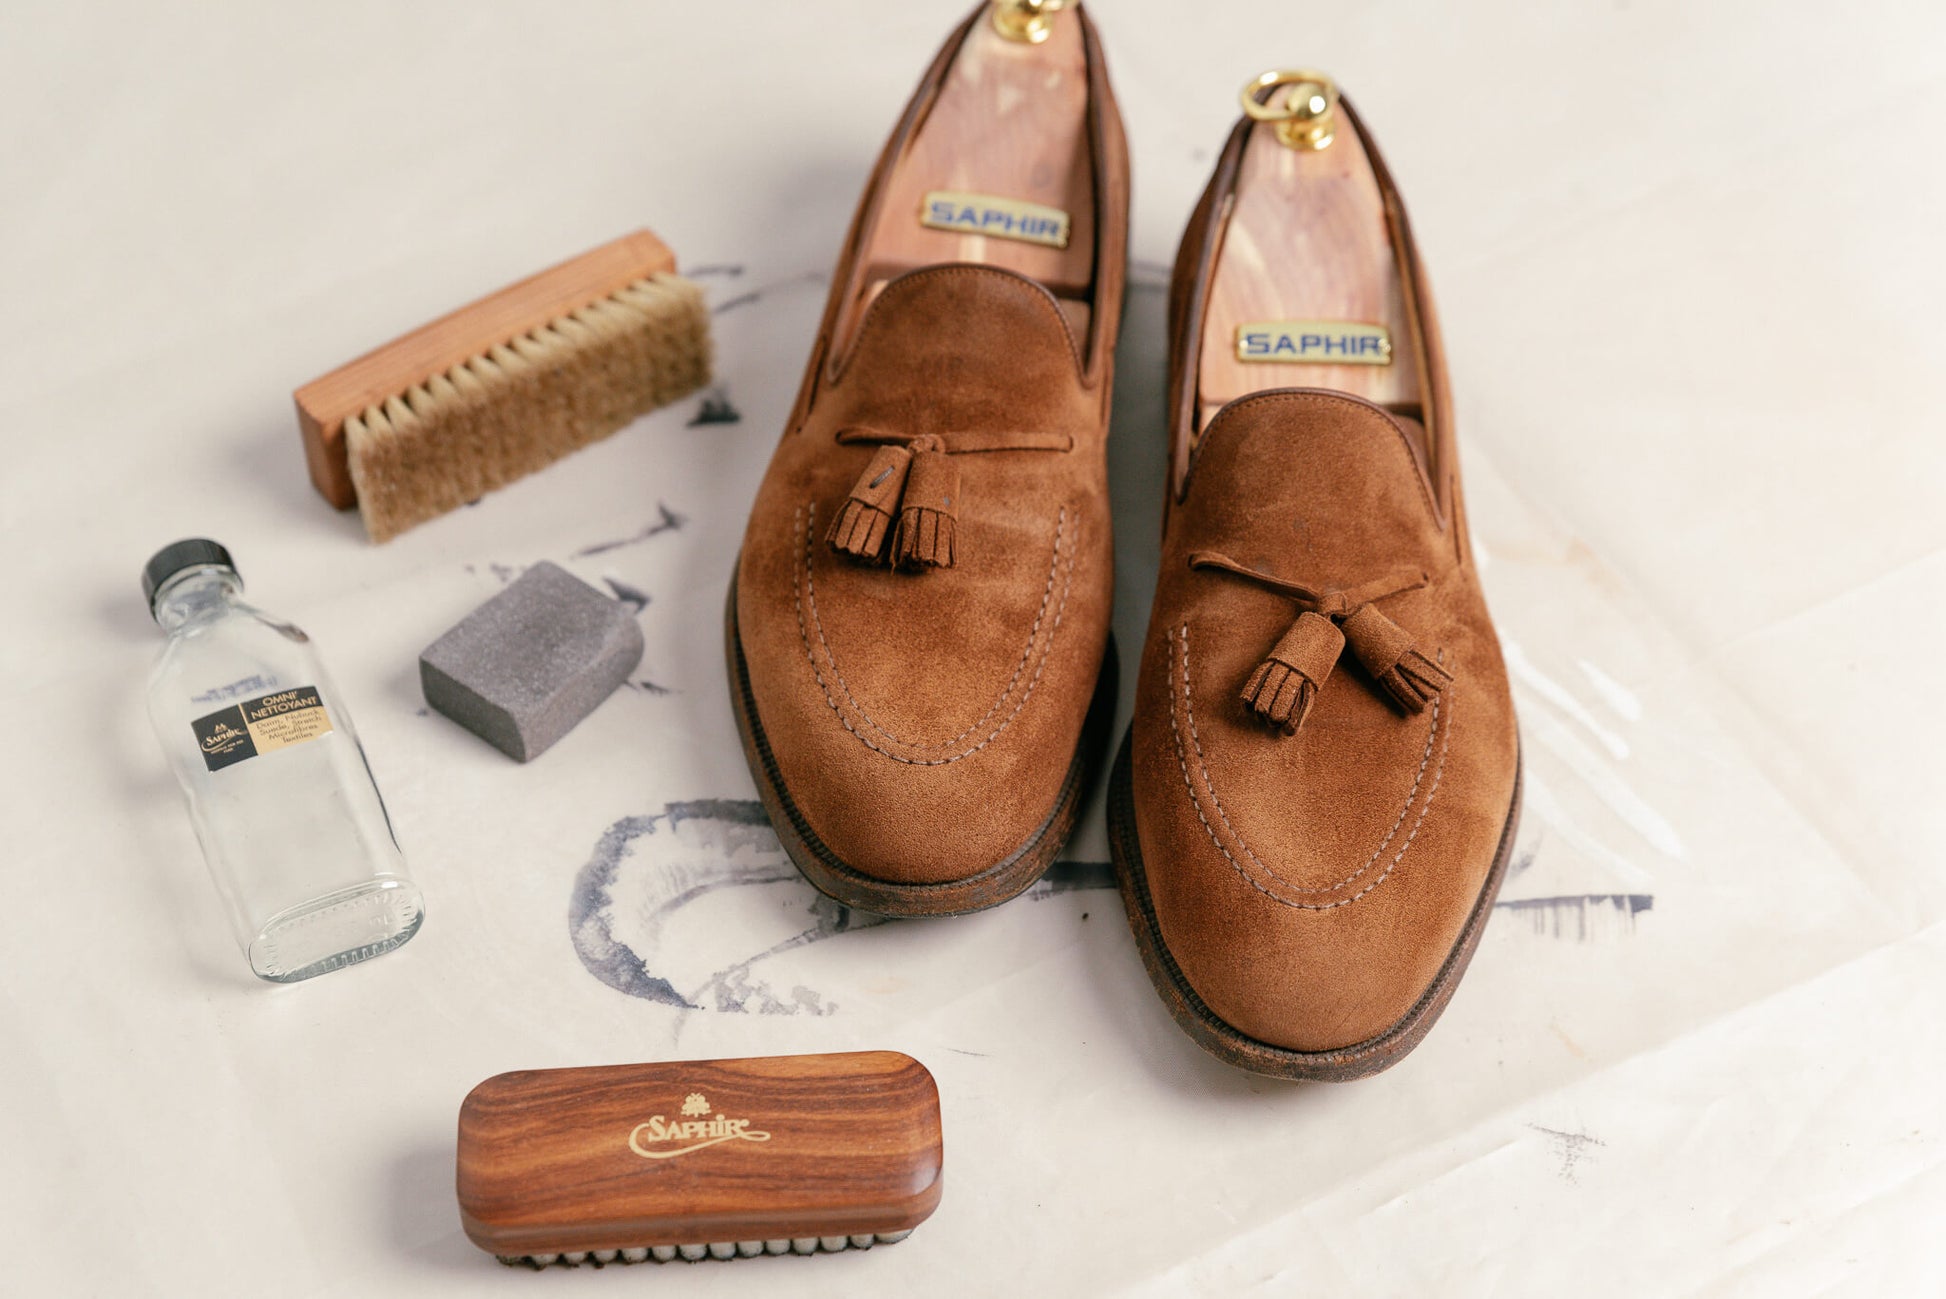 Crockett & Jones polo snuff suede cavendish loafer shown with Saphir crepe brush, omni'nettoyant suede cleaner, suede gommadin brick, and saphir MDO horsehair brush and Saphir Cedar Shoe trees